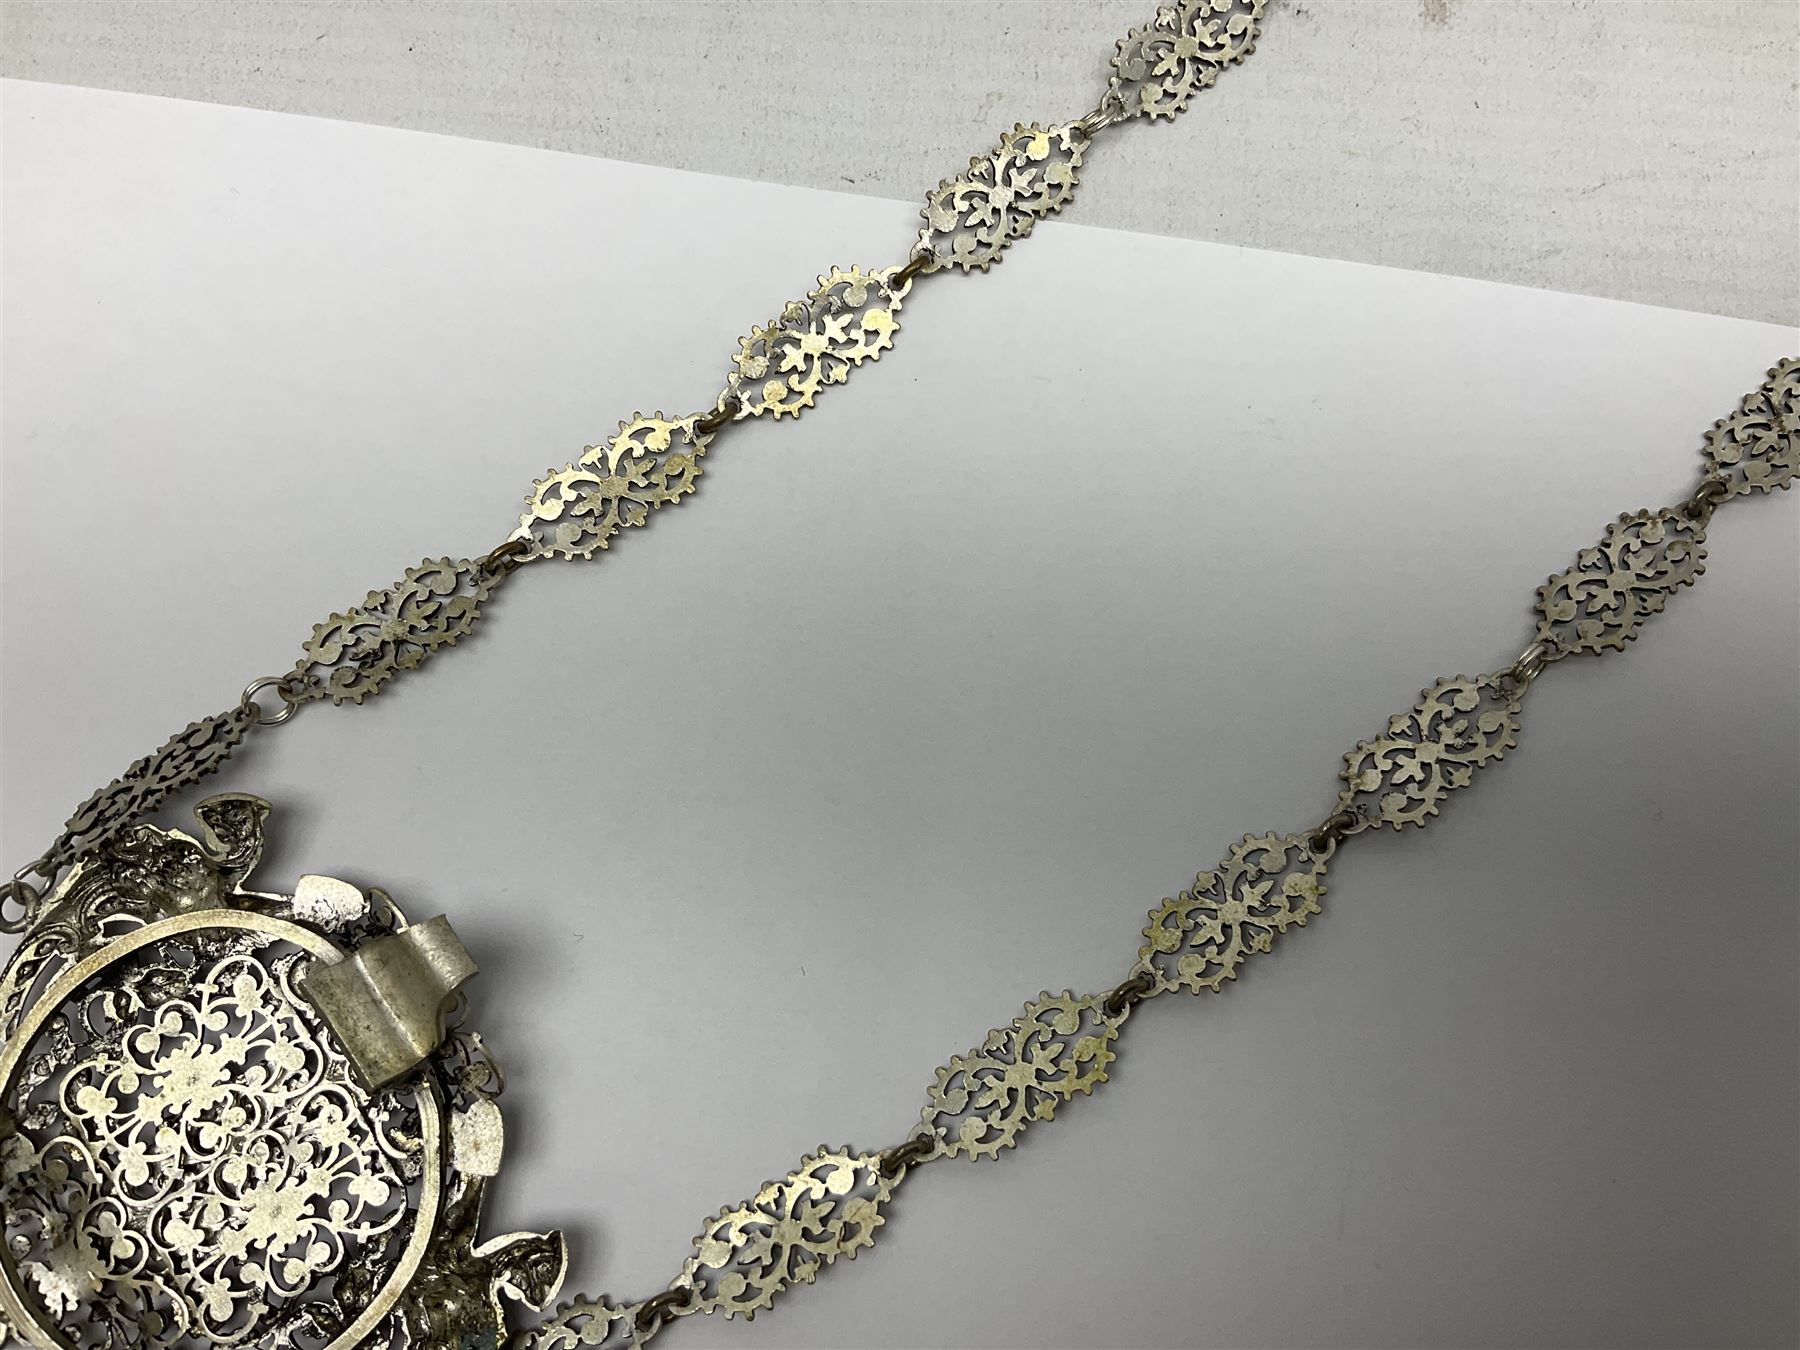 19th century continental silver plated chatelaine - Image 12 of 15